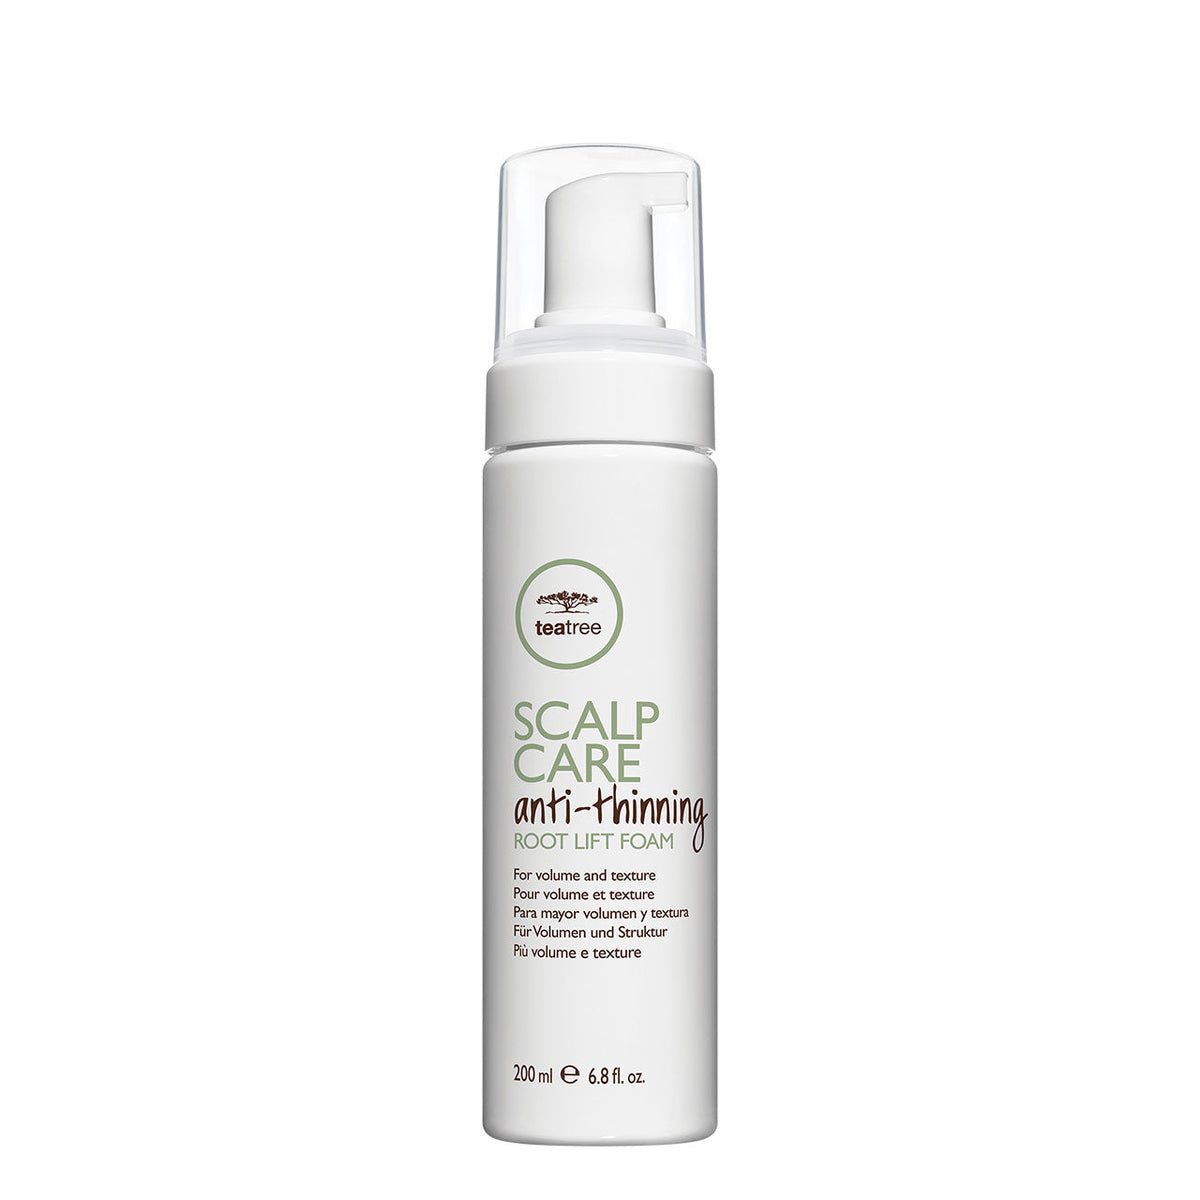 Tea Tree Scalp Care Anti-Thinning Root Lift Foam - 200ML - by Paul Mitchell |ProCare Outlet|